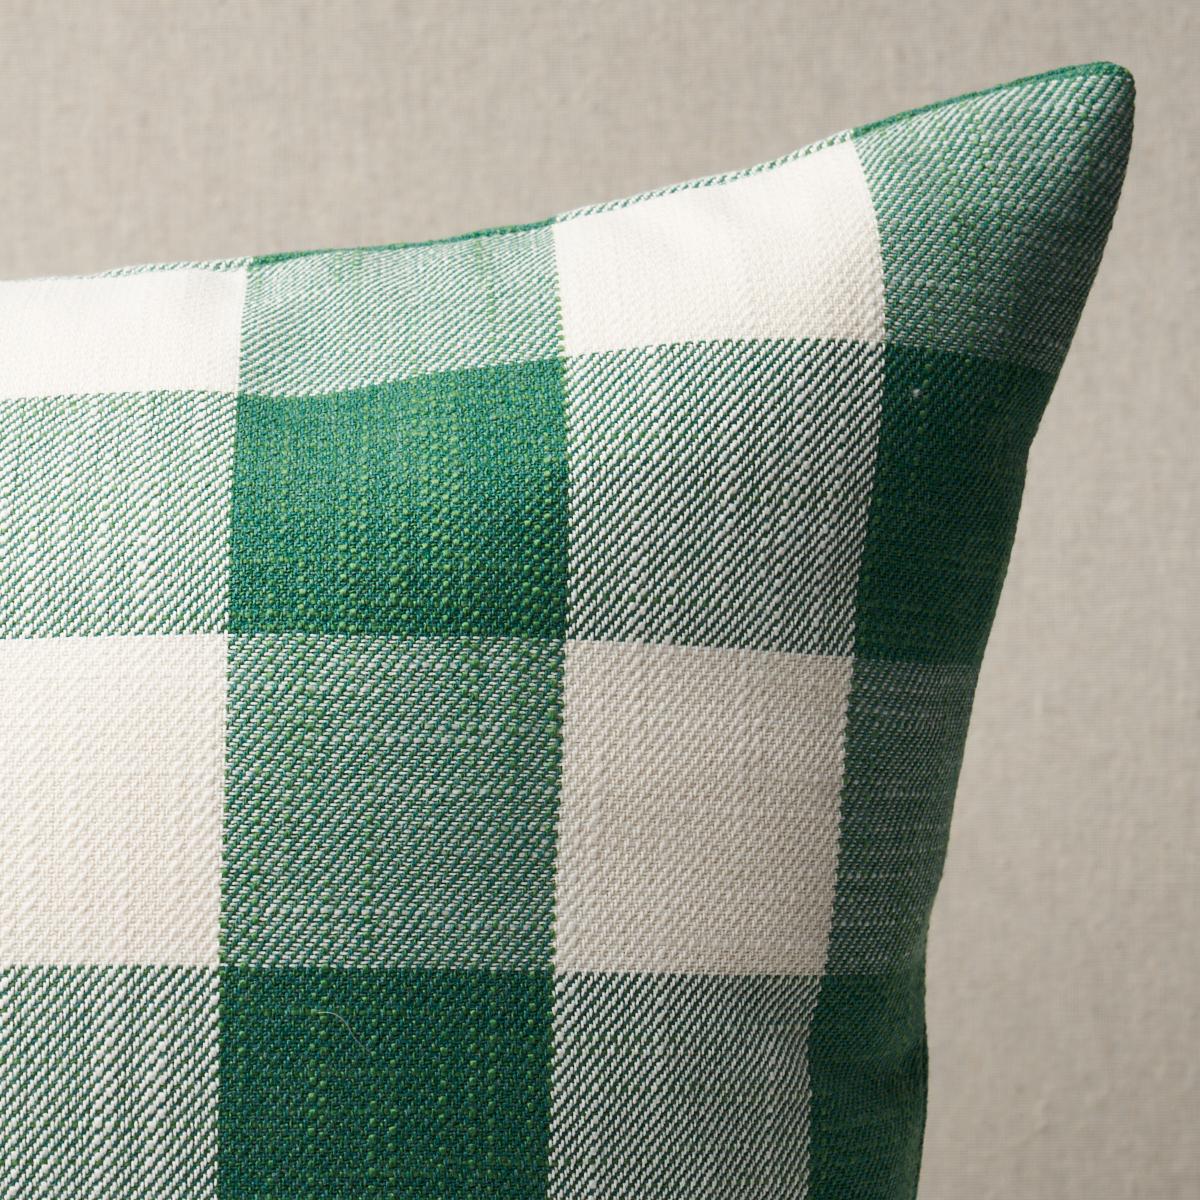 This pillow features Picnic Indoor/Outdoor by Mary McDonald for Schumacher with a knife edge finish. Stylish and classic, Picnic Indoor/Outdoor in emerald is a wonderfully versatile high-performance fabric design by Mary McDonald. Pillow includes a